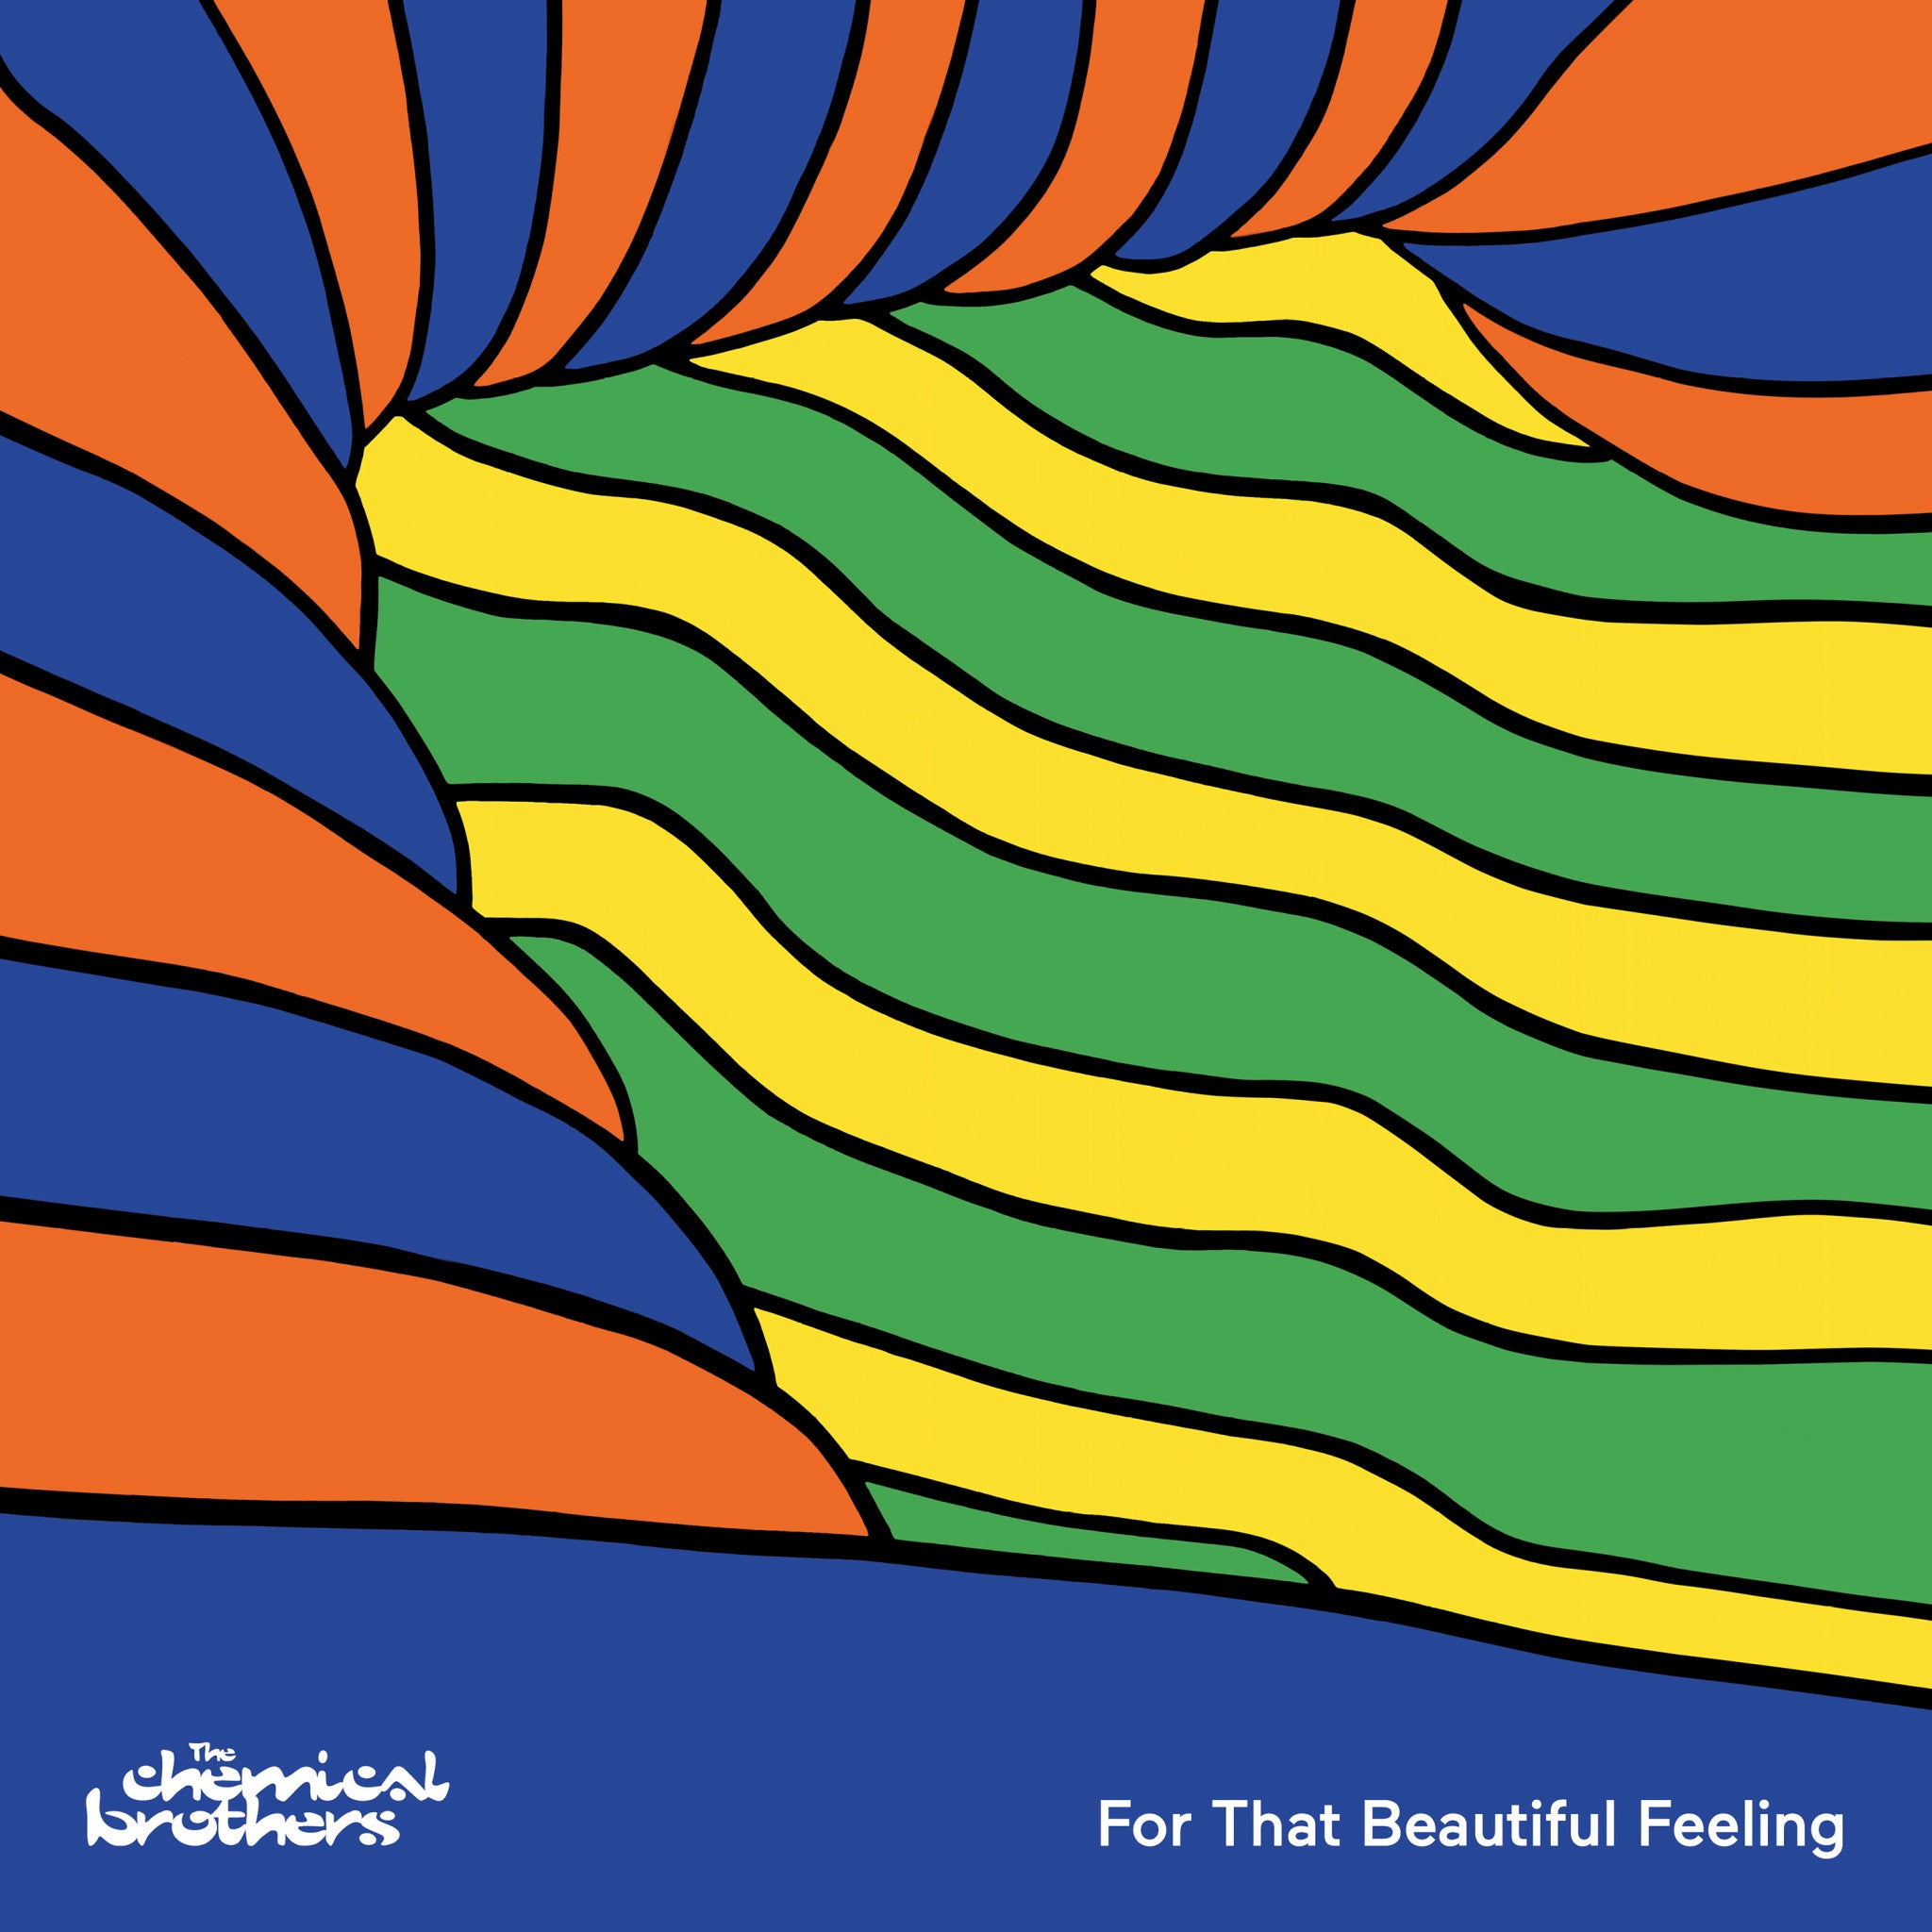 RESEÑA-THE CHEMICAL BROTHERS